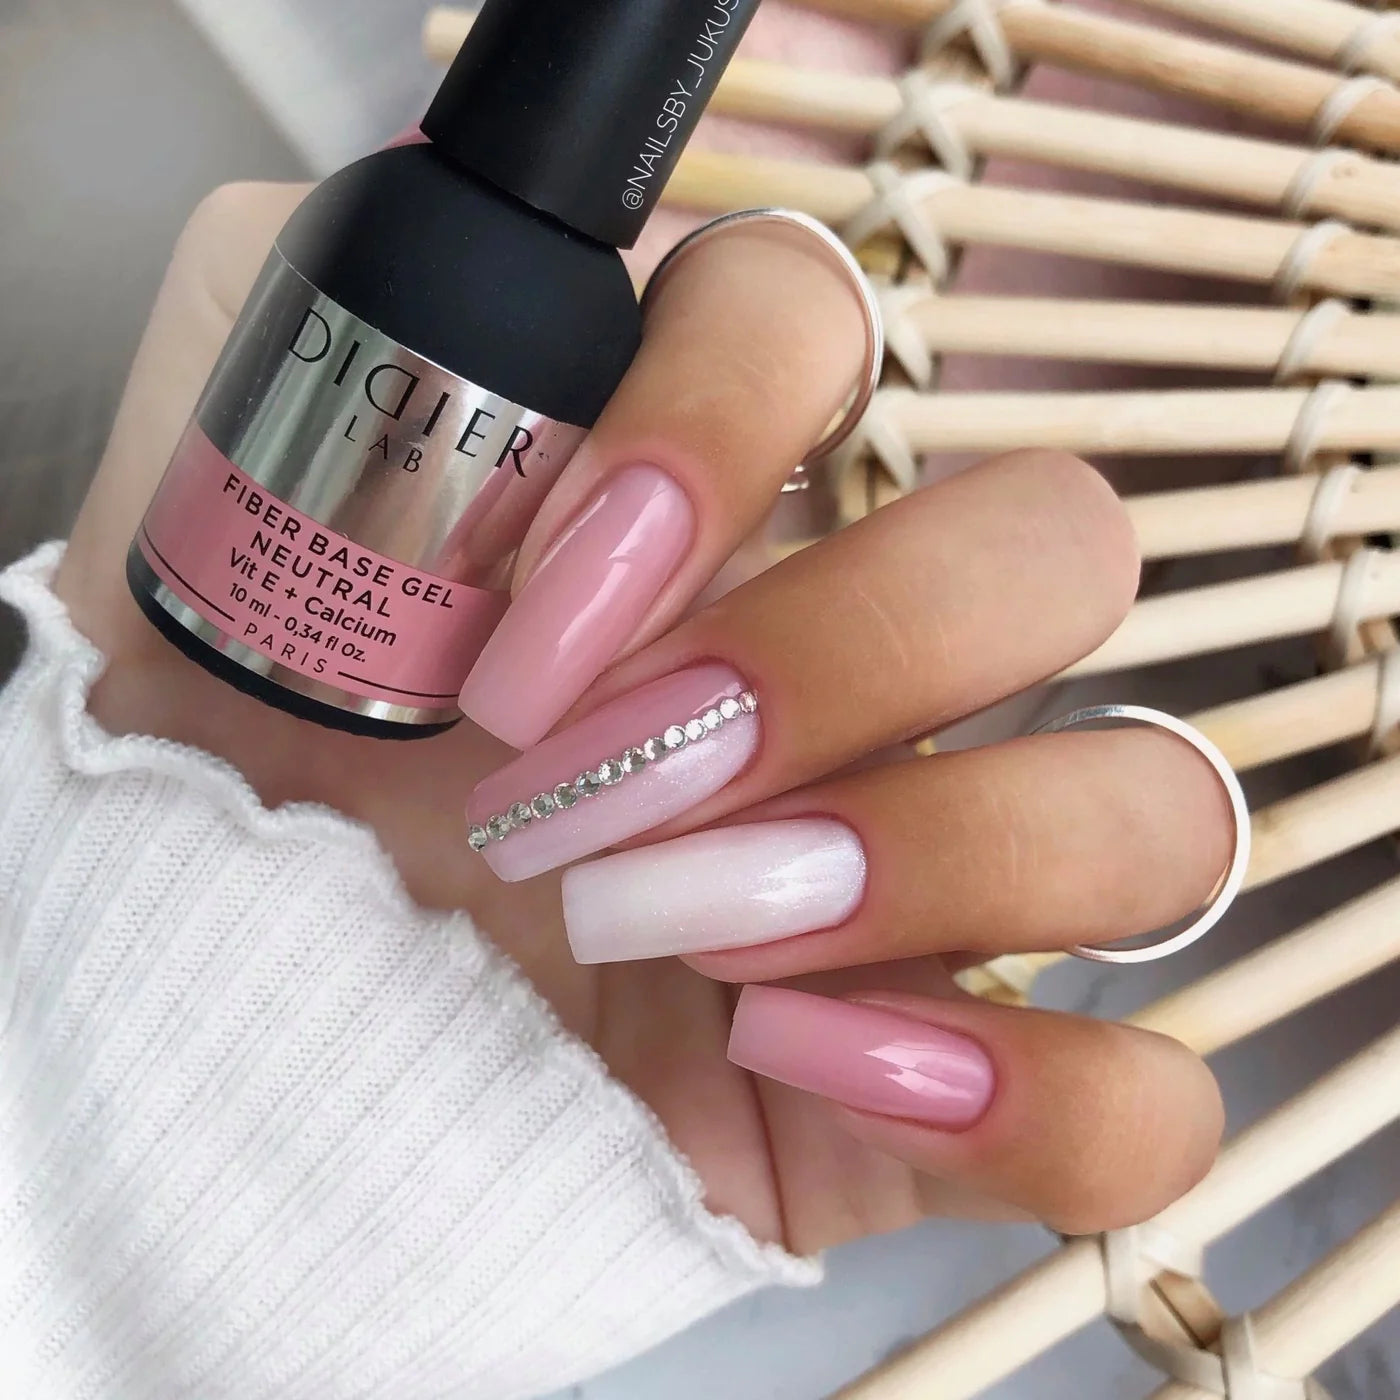 Five Neutral Nude Pinks I'm Loving Right Now - The Beauty Look Book